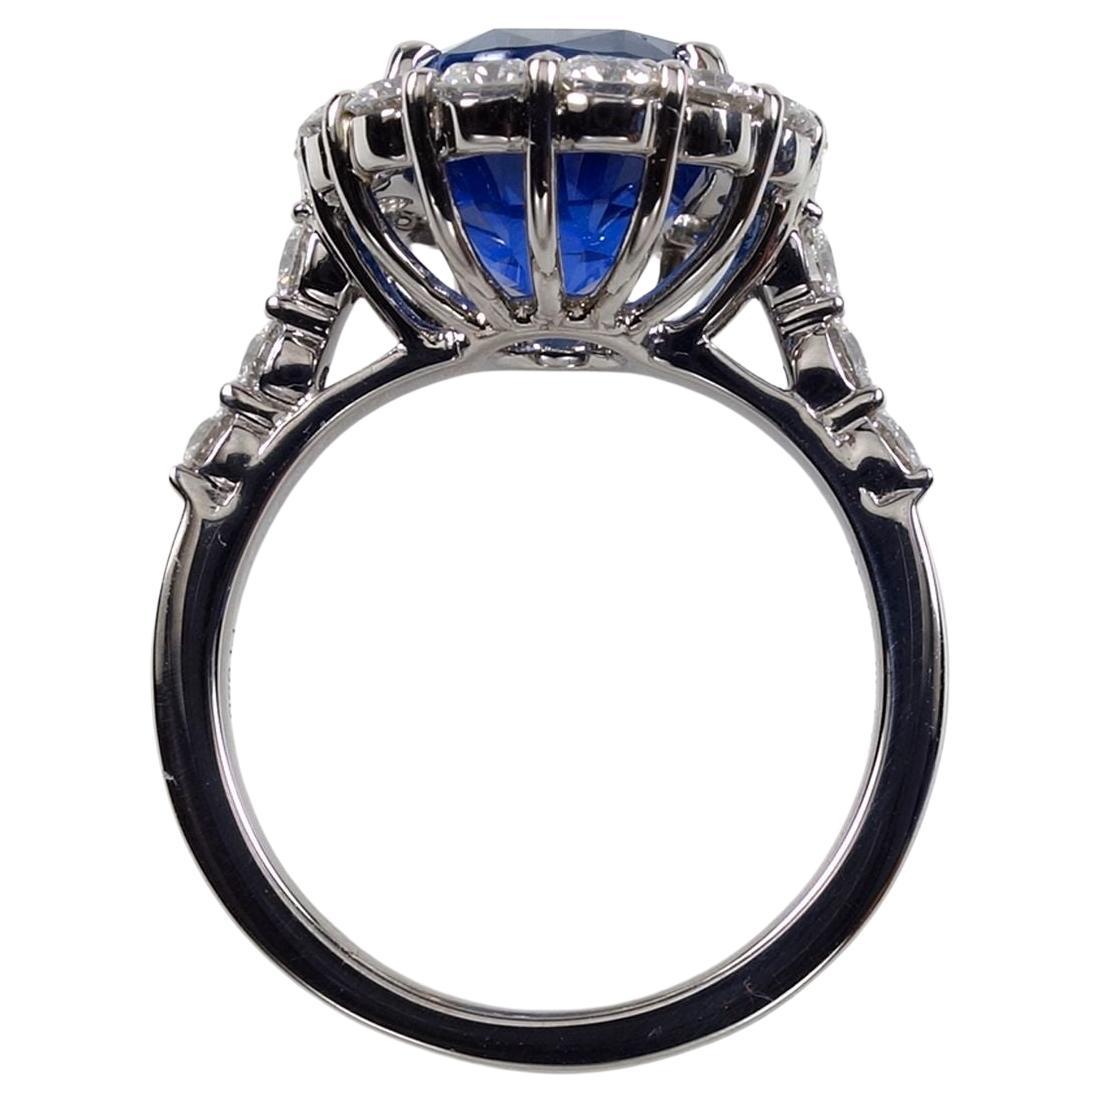  timeless elegance of our Platinum Ring featuring a centerpiece of a breathtaking unheated 6.40ct Oval-shaped Fine Natural Sapphire. Certified by G.I.A. with origin from Sri Lanka, this ring captures the essence of unparalleled beauty and